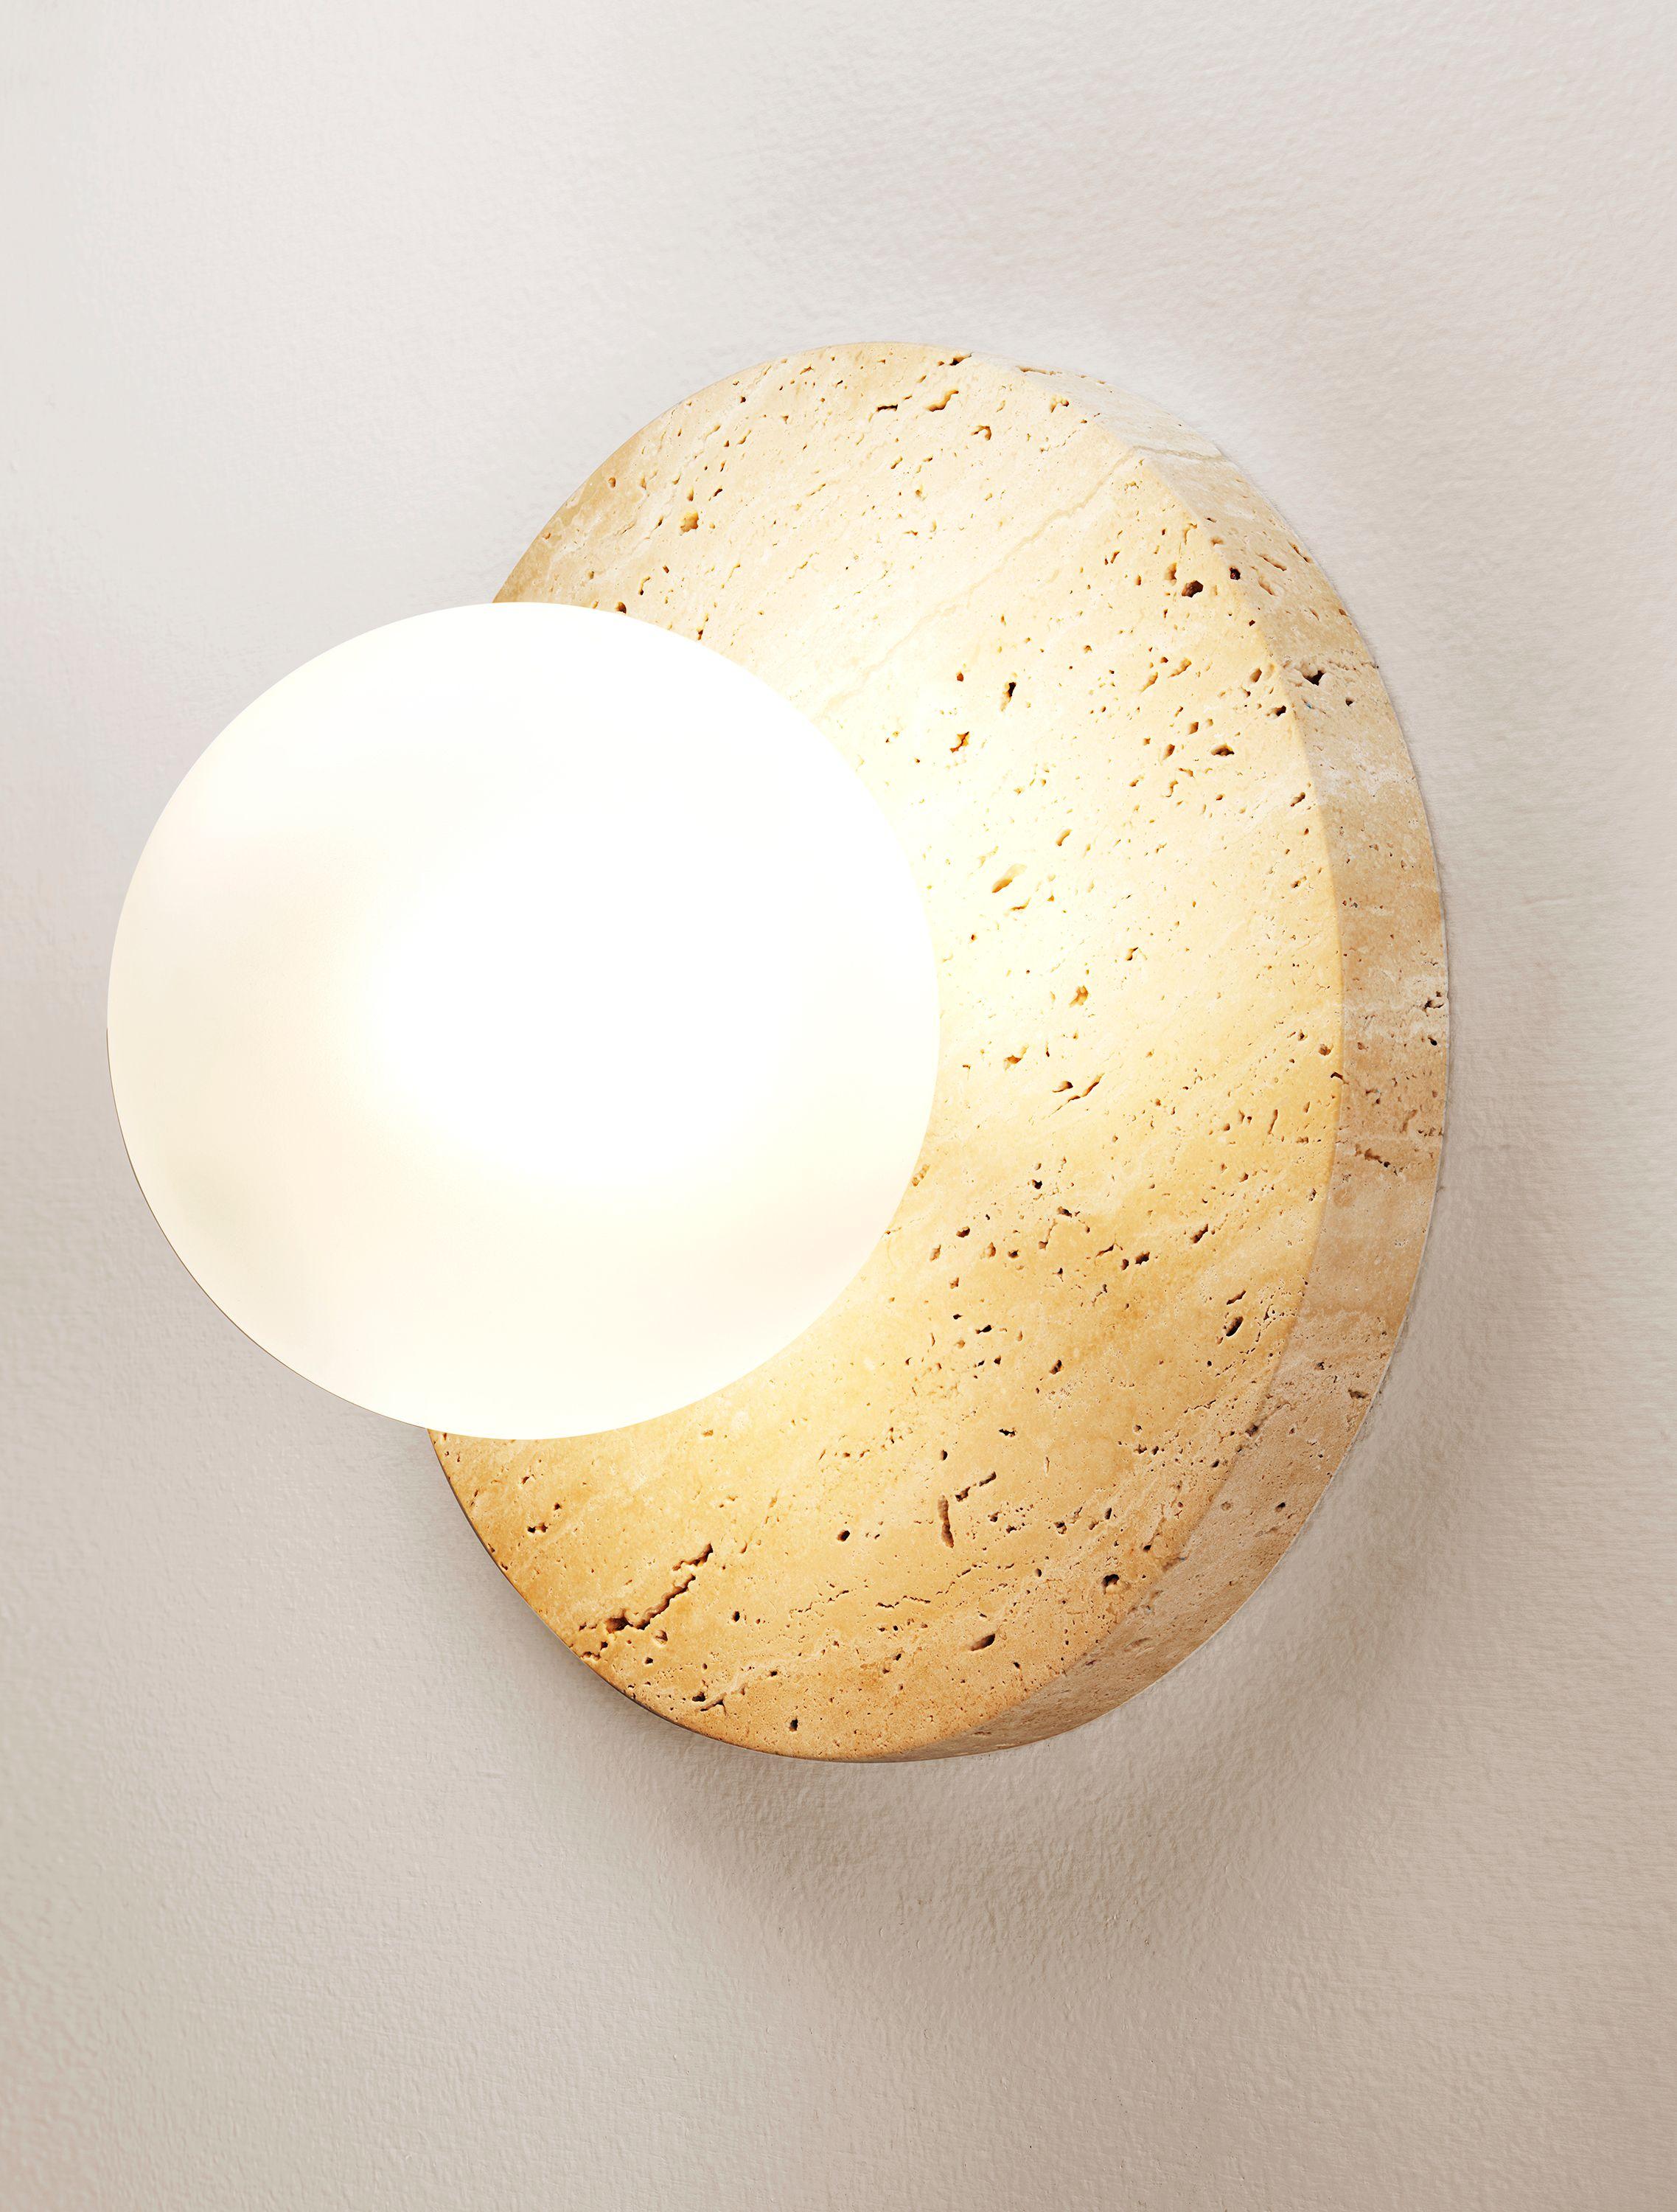 LUCIE FLUSHMOUNT
Introducing the Lucie Flushmount in Travertine and glass; a daring tribute to timeless design inspired by the graceful proportions of Dior's iconic pearl earrings. Lucie's circular stone backplate serves as an exquisite canvas for